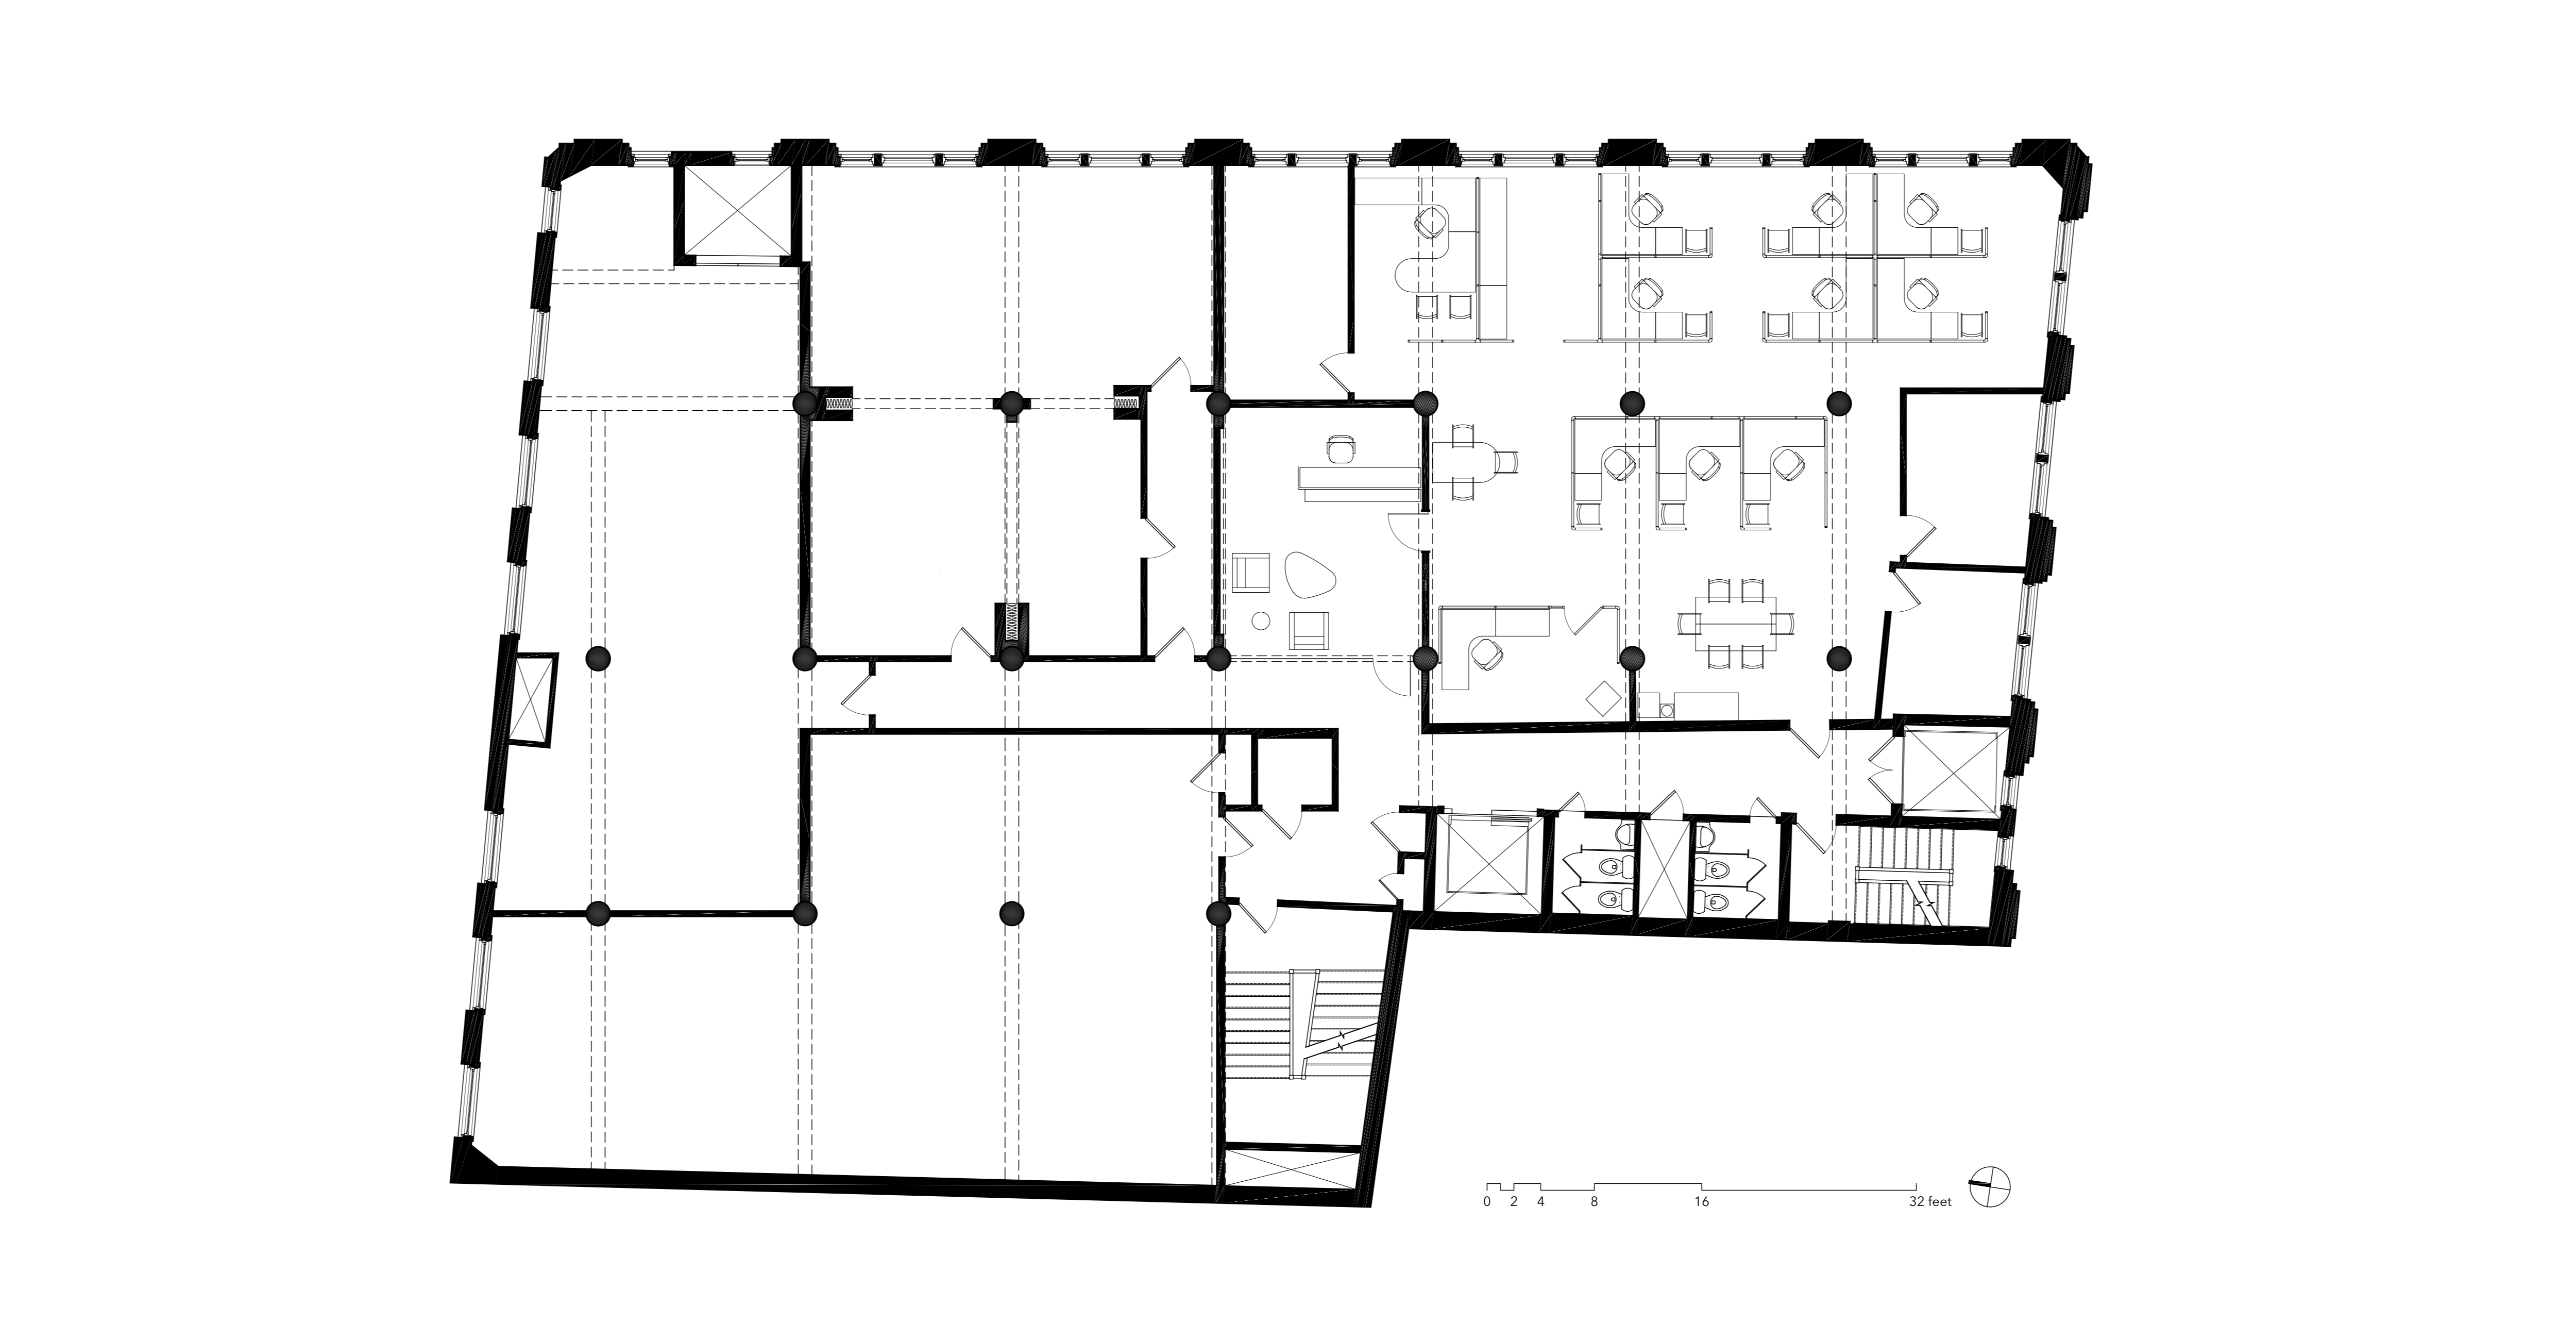 Overview floor plan showing the new reception in context